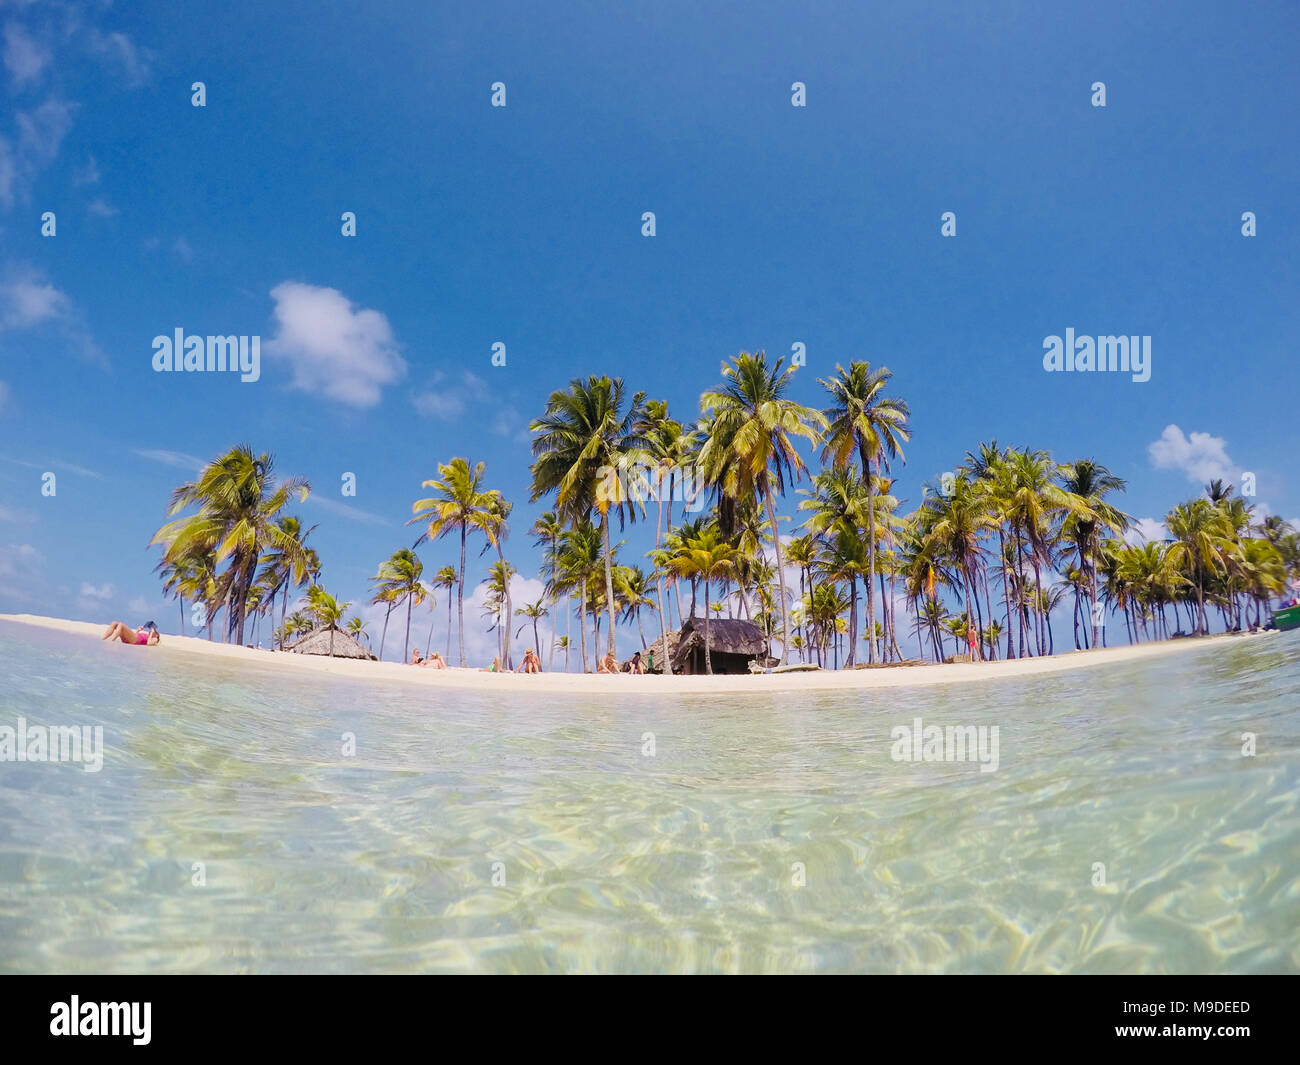 summer time  - people on small island relaxing on beach below palm trees Stock Photo